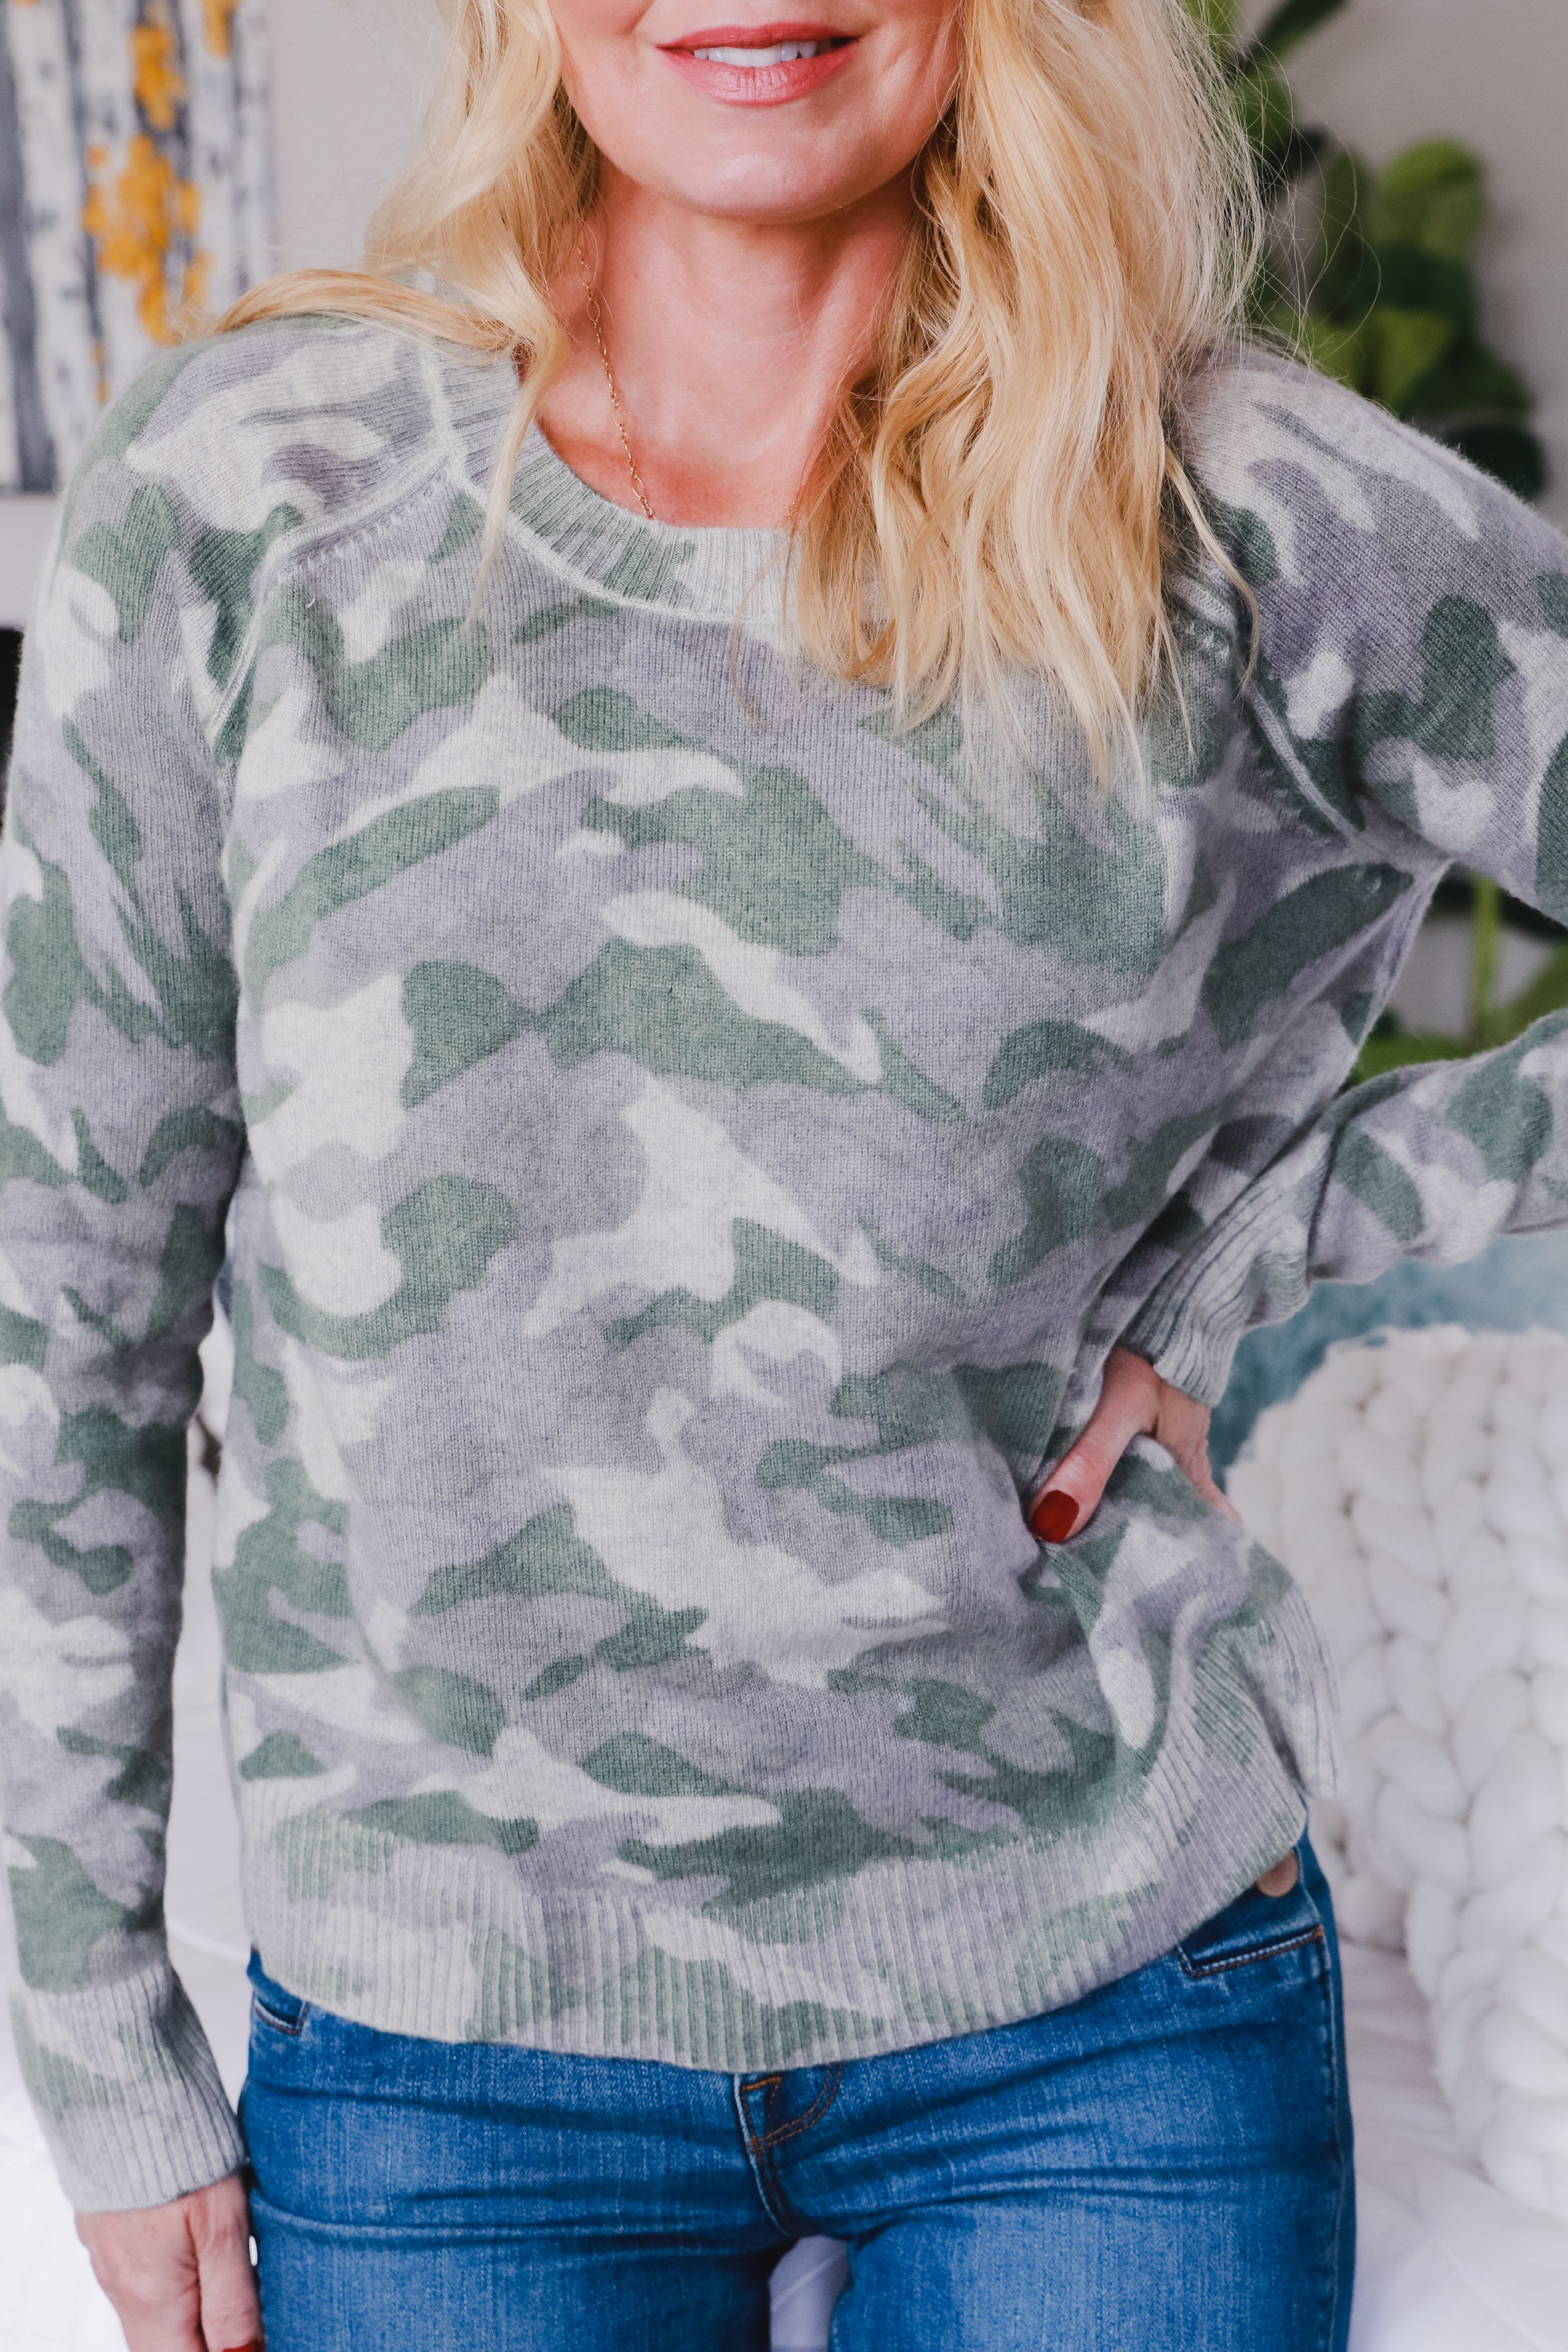 Aqua Cashmere Sweater, Erin Busbee of Busbee Style wearing a green camo cashmere sweater by Aqua from Bloomingdale's untucked from her J Brand Natasha jeans in Telluride, Colorado